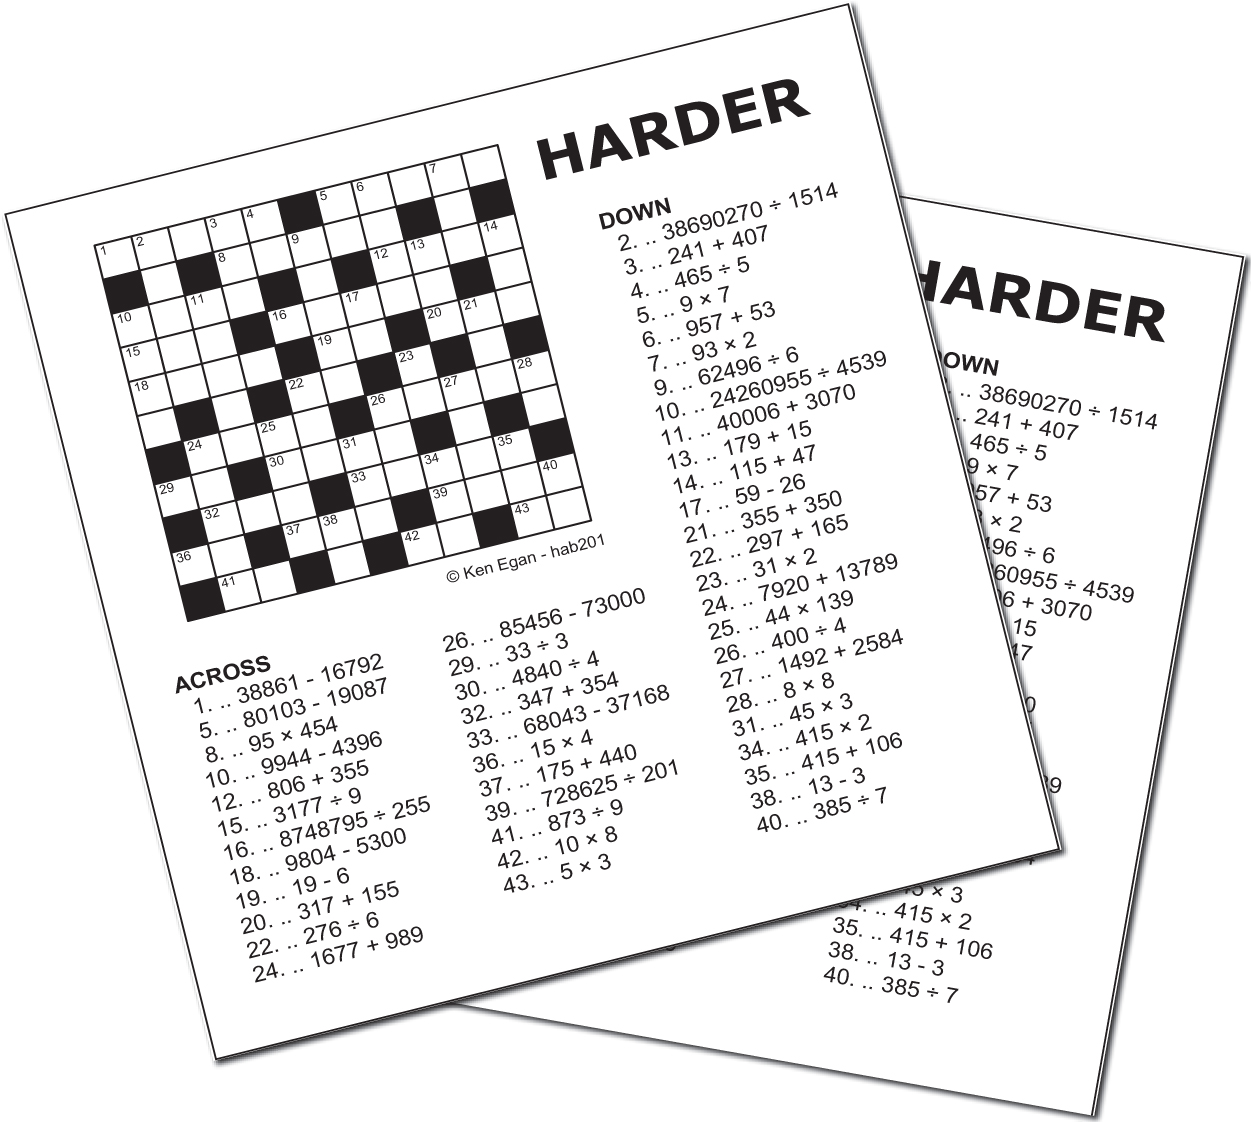 Image 1 for 20 HARDER PUZZLE BOOKLET 01